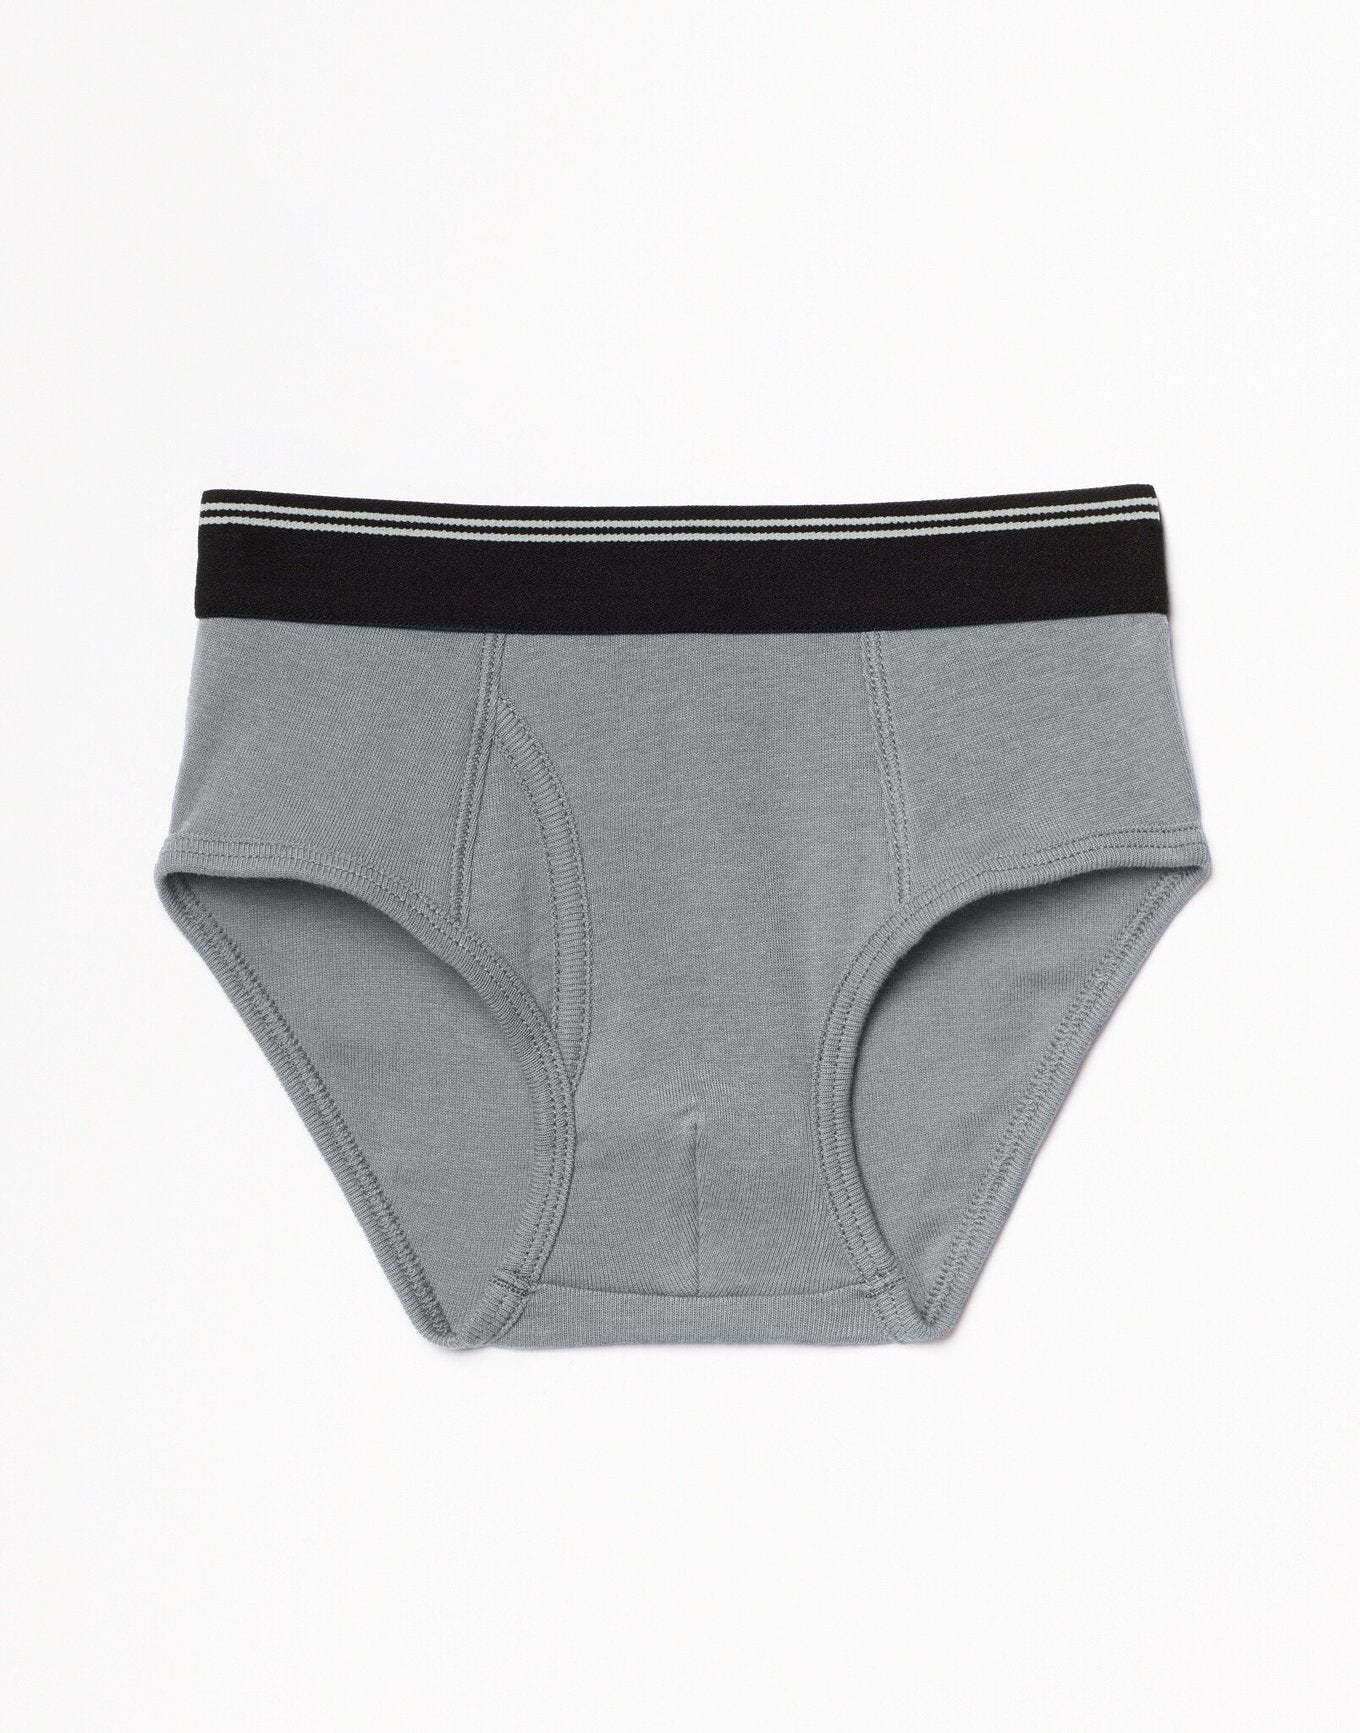 Outlines Kids Lucas in color Ultimate Gray and shape brief